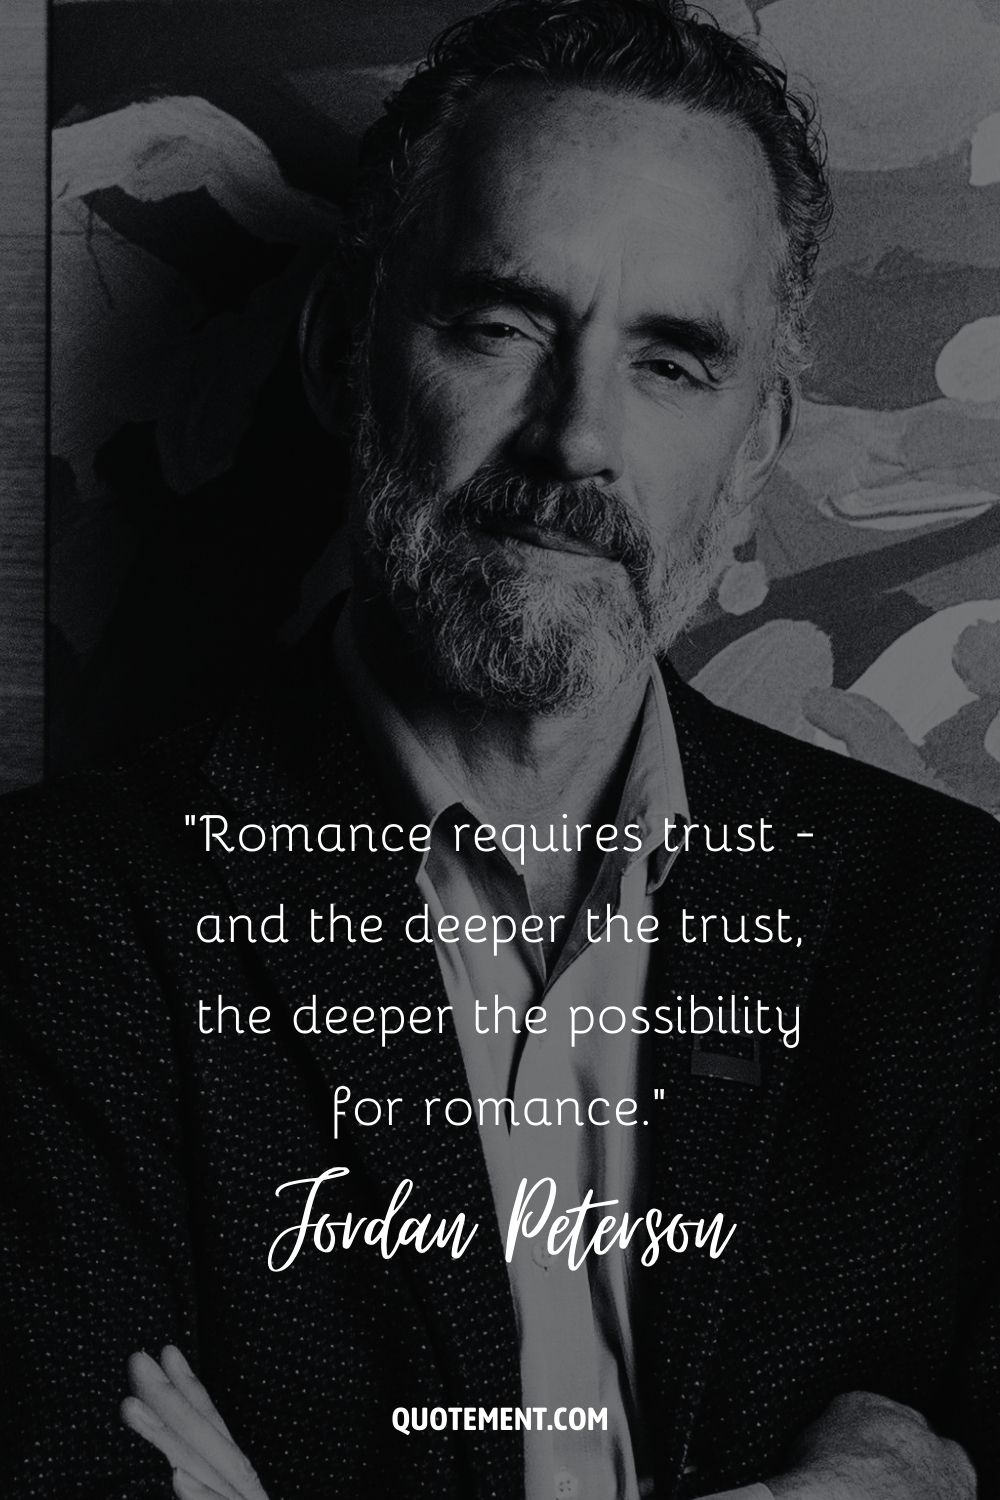 Romance requires trust - and the deeper the trust, the deeper the possibility for romance